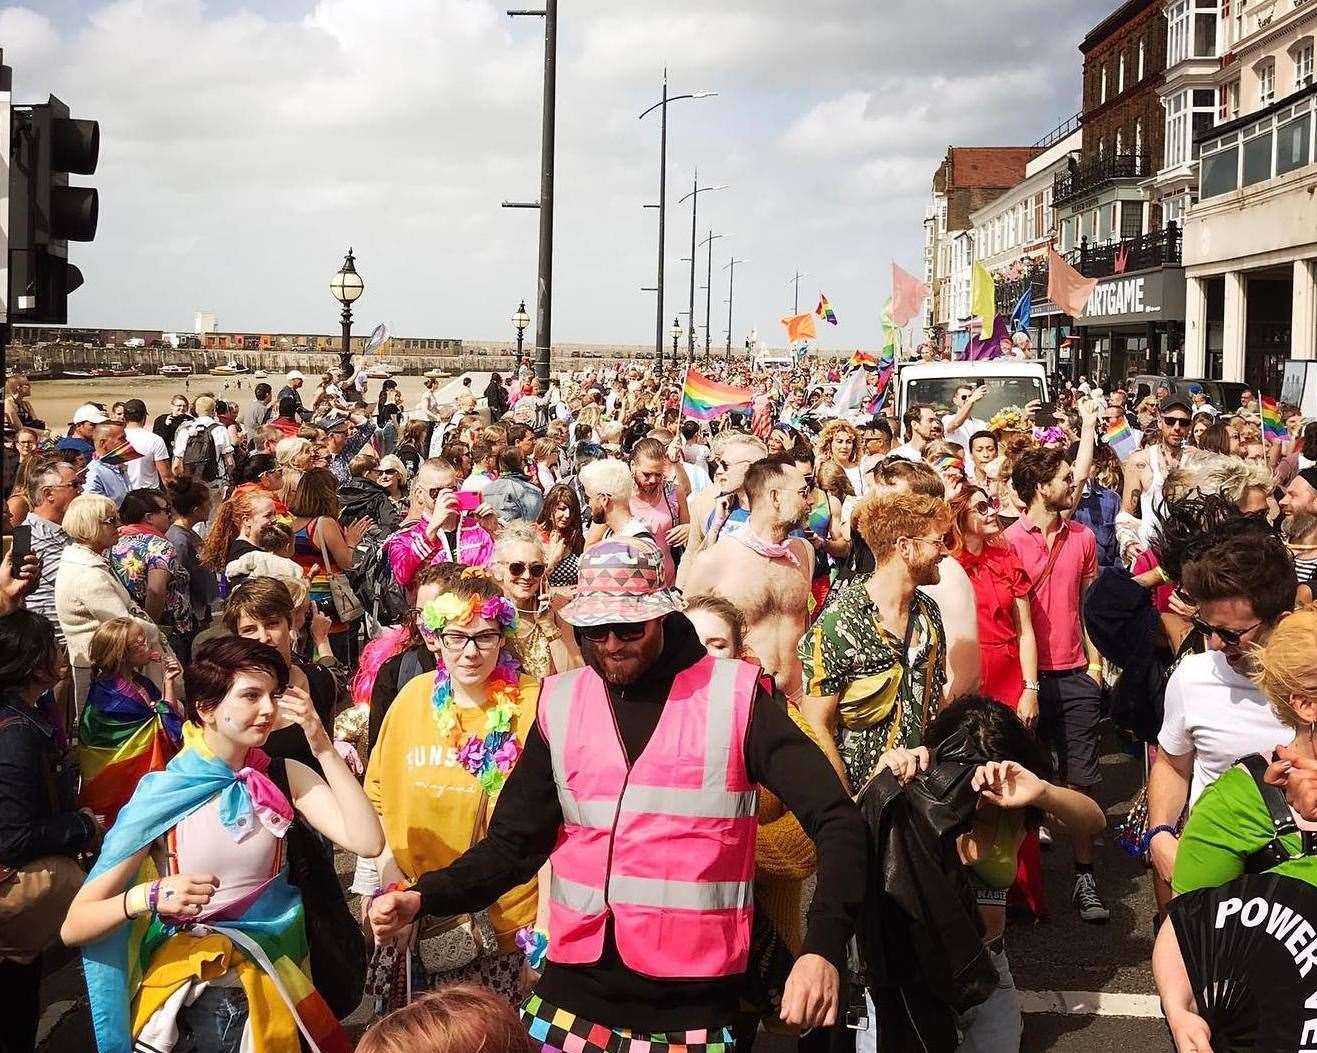 Margate Pride parade events are momentous occasions in the town. Picture: Margate Pride